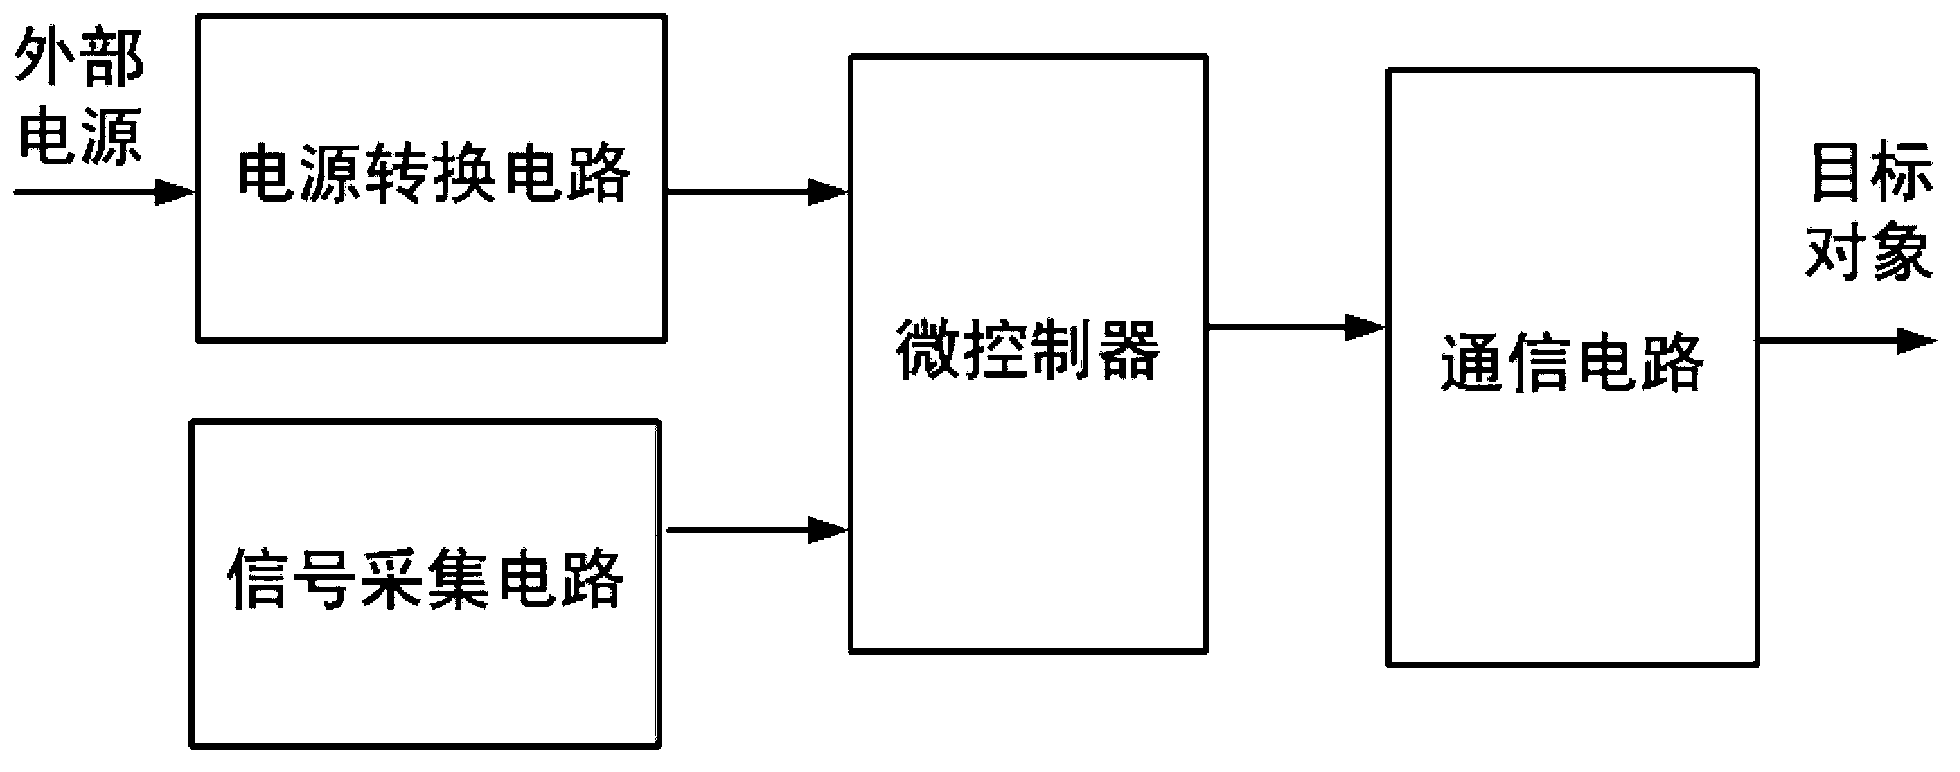 Built-in electric energy collection module of household appliance